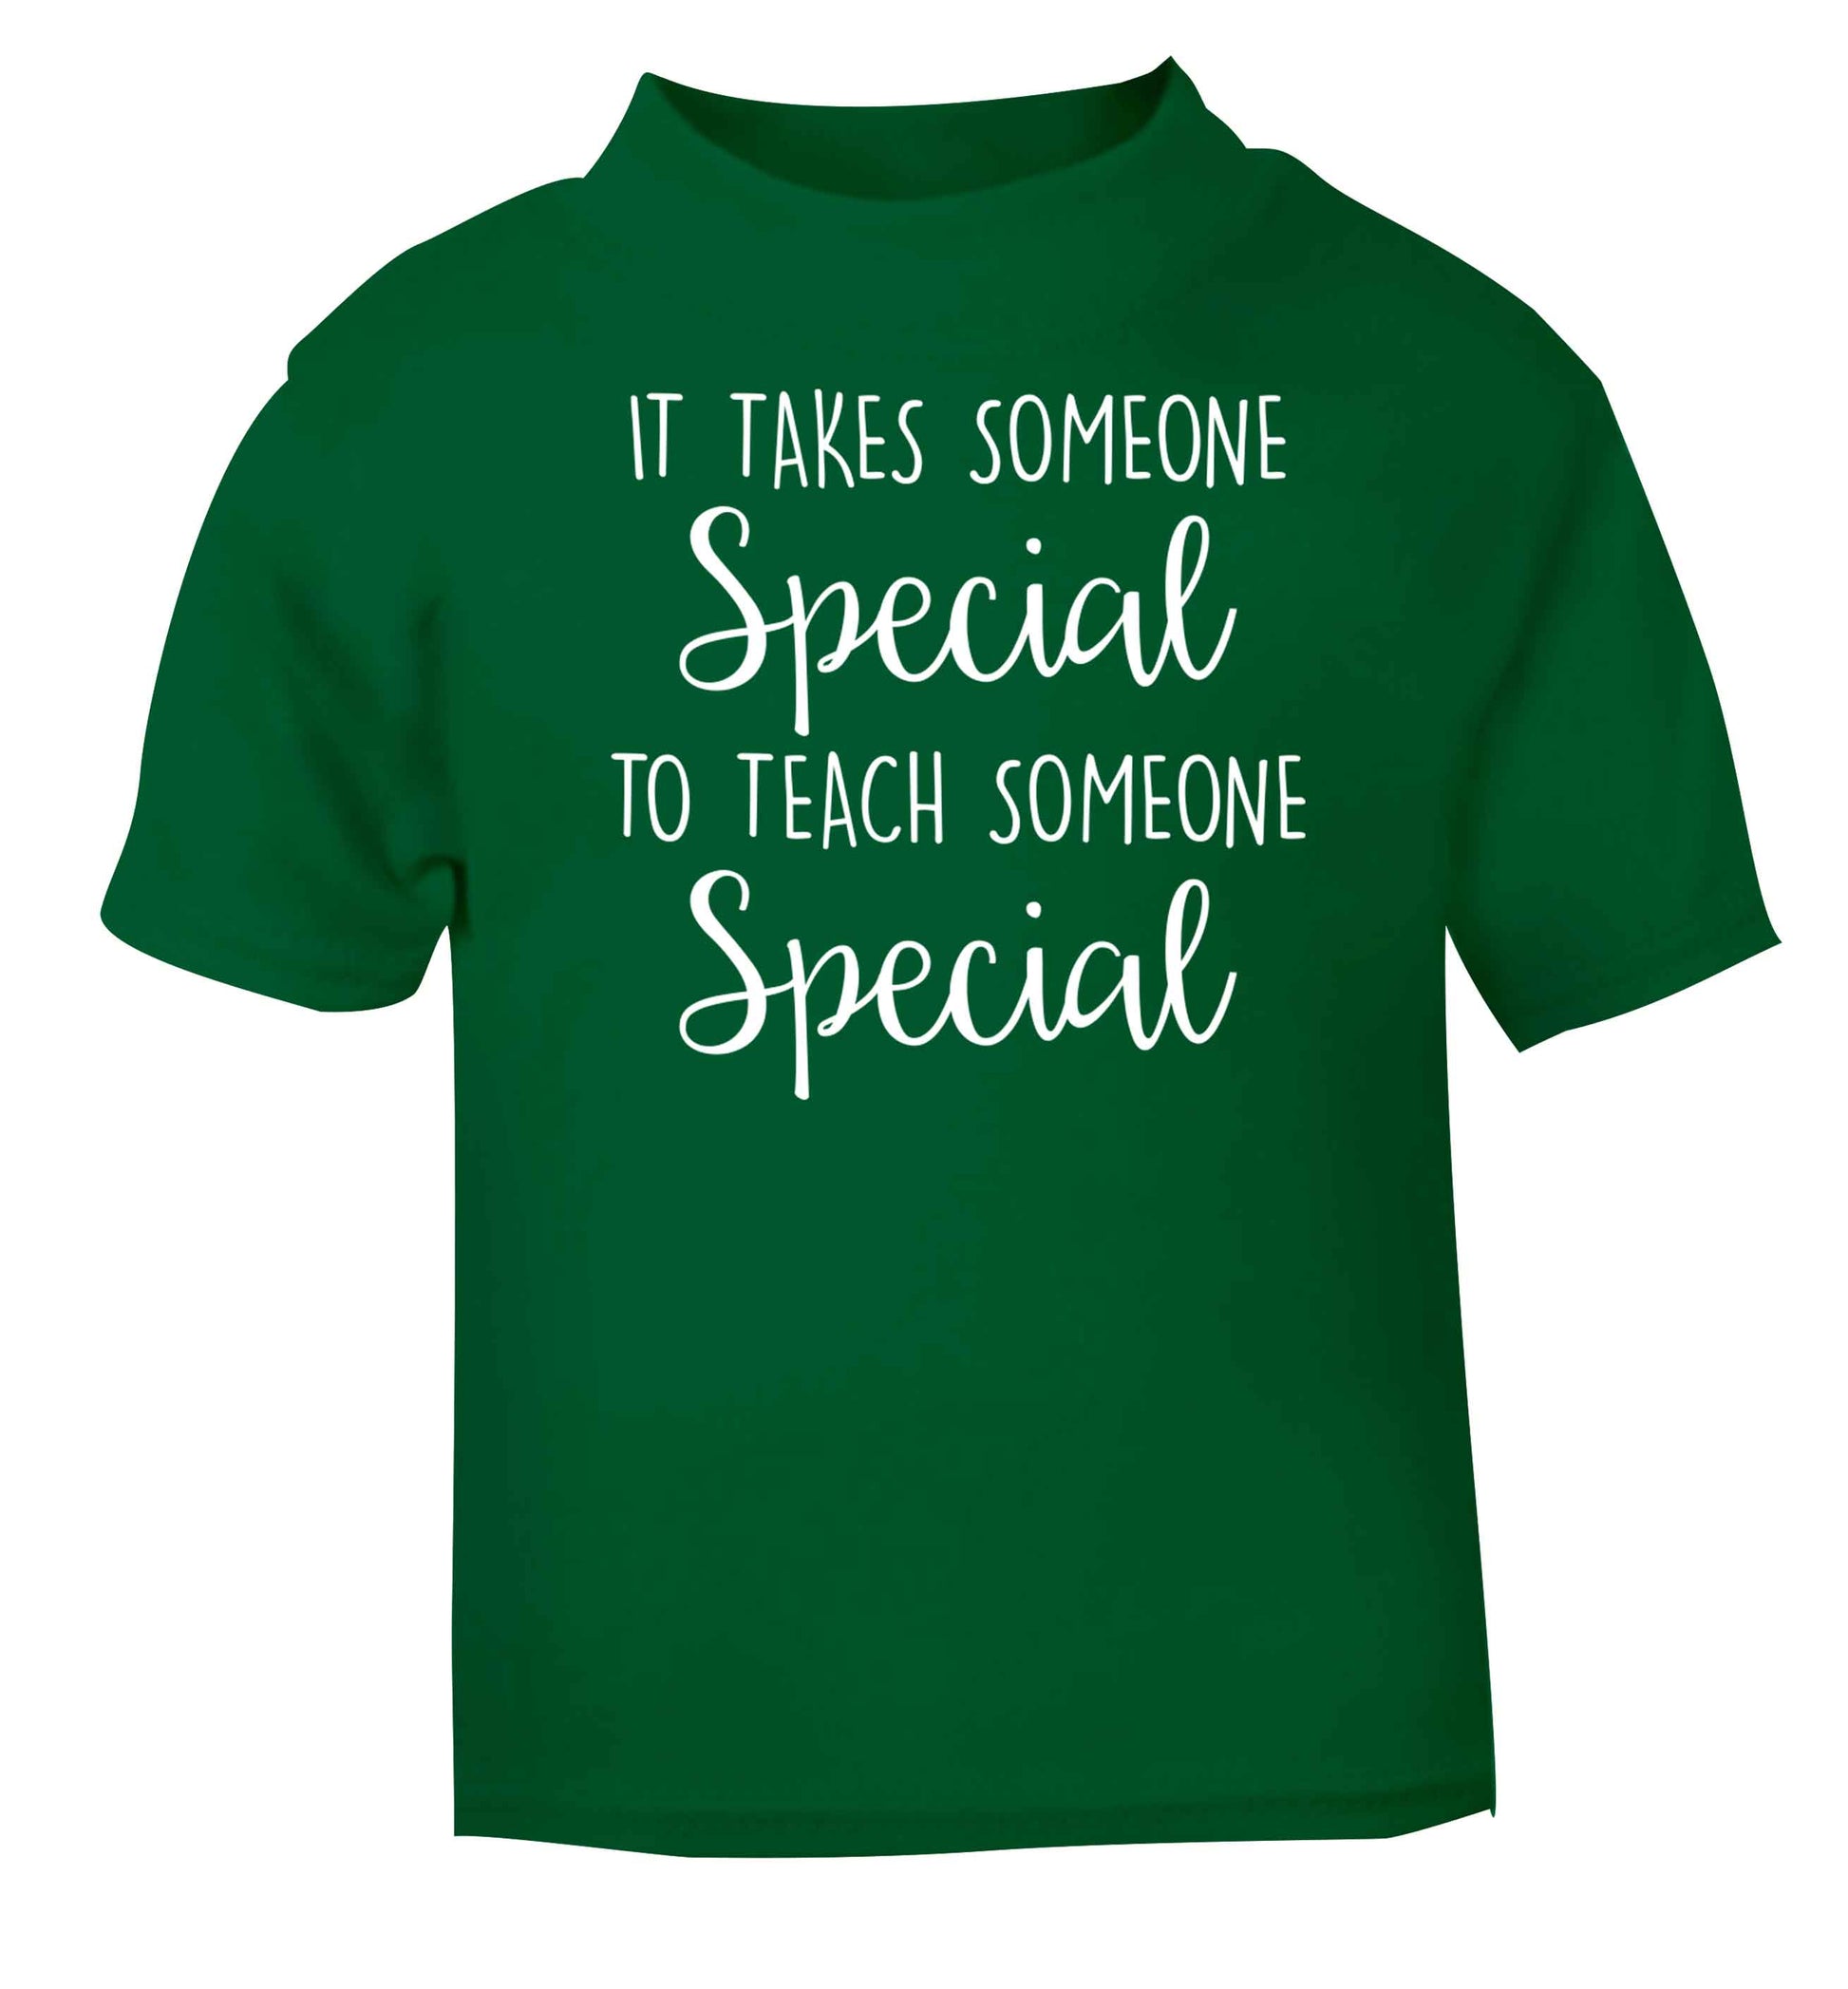 It takes someone special to teach someone special green baby toddler Tshirt 2 Years